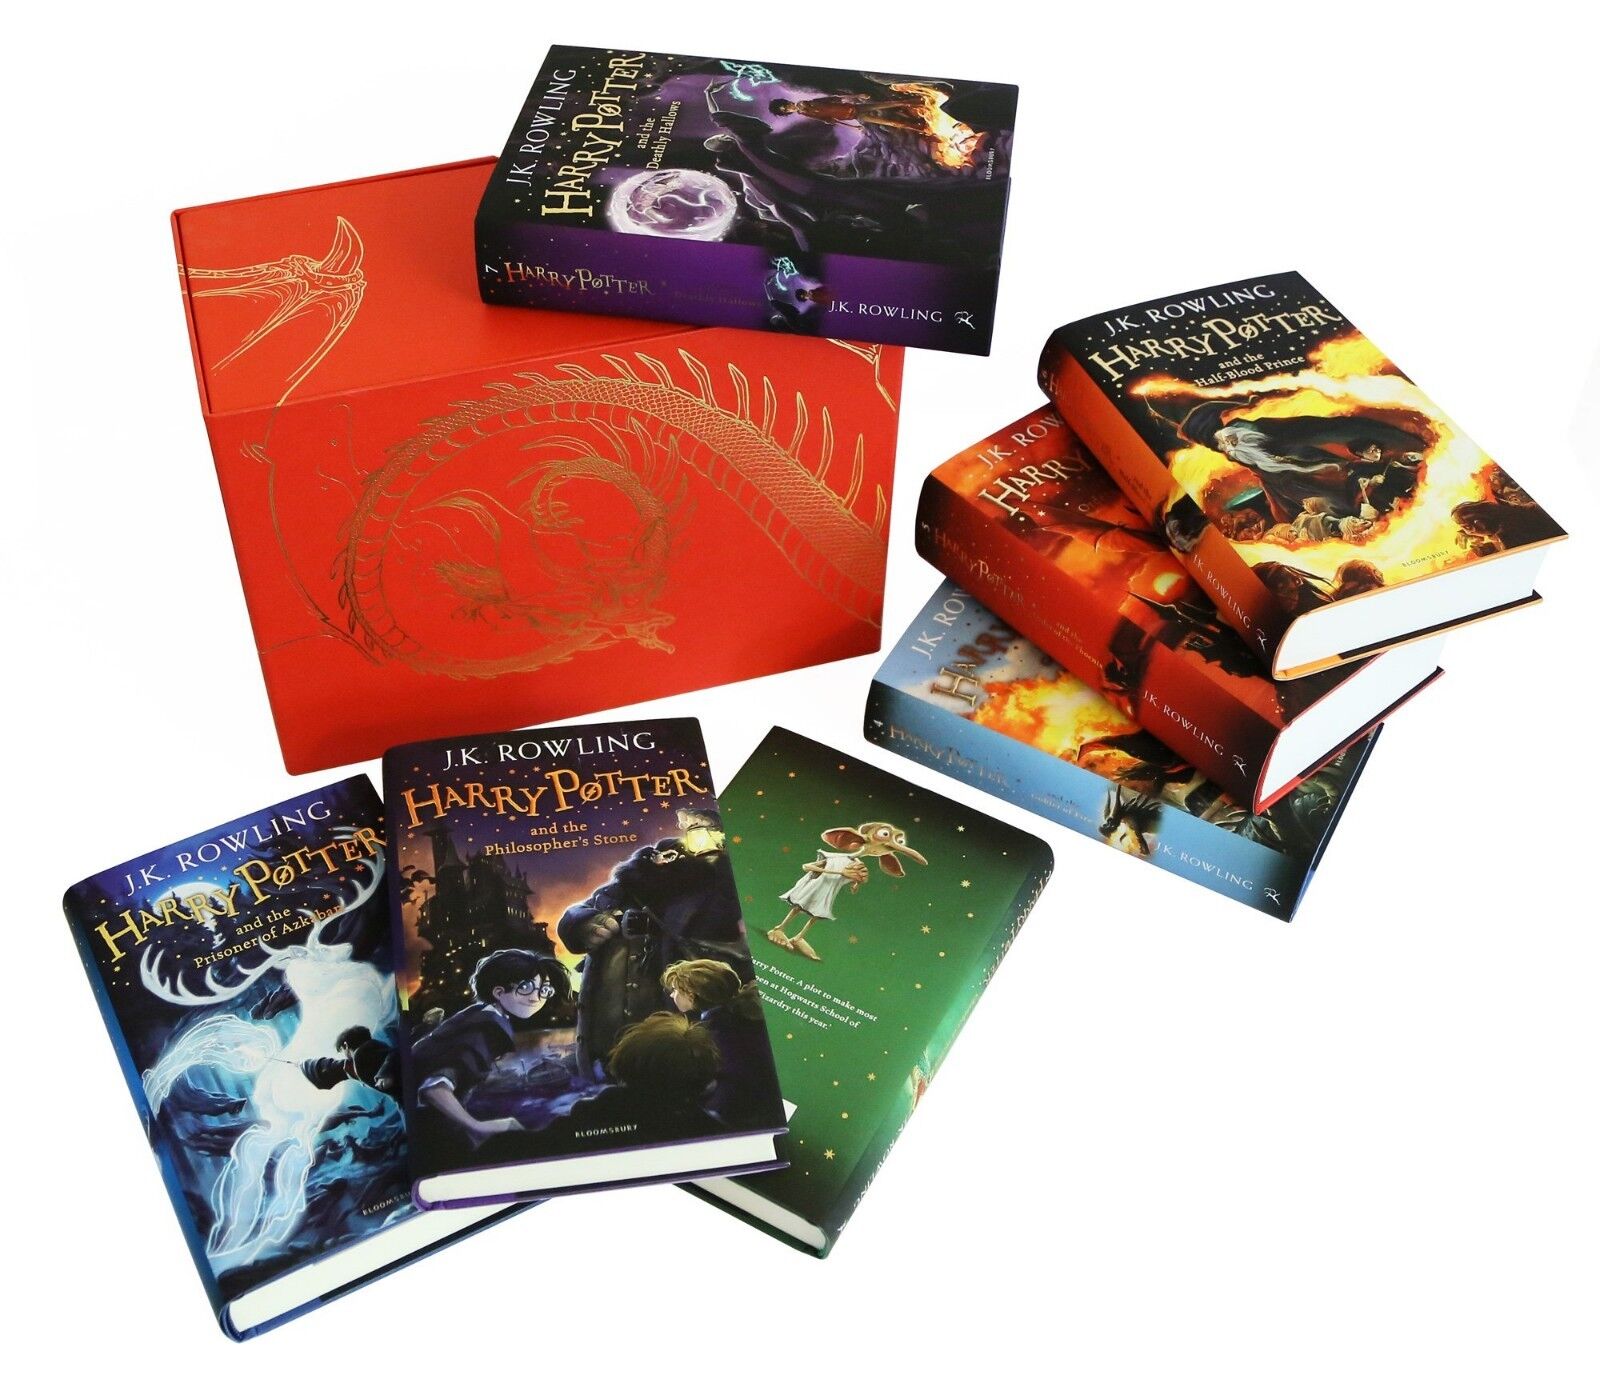 Harry Potter Box Set: The Complete Collection (Children's Hardback 